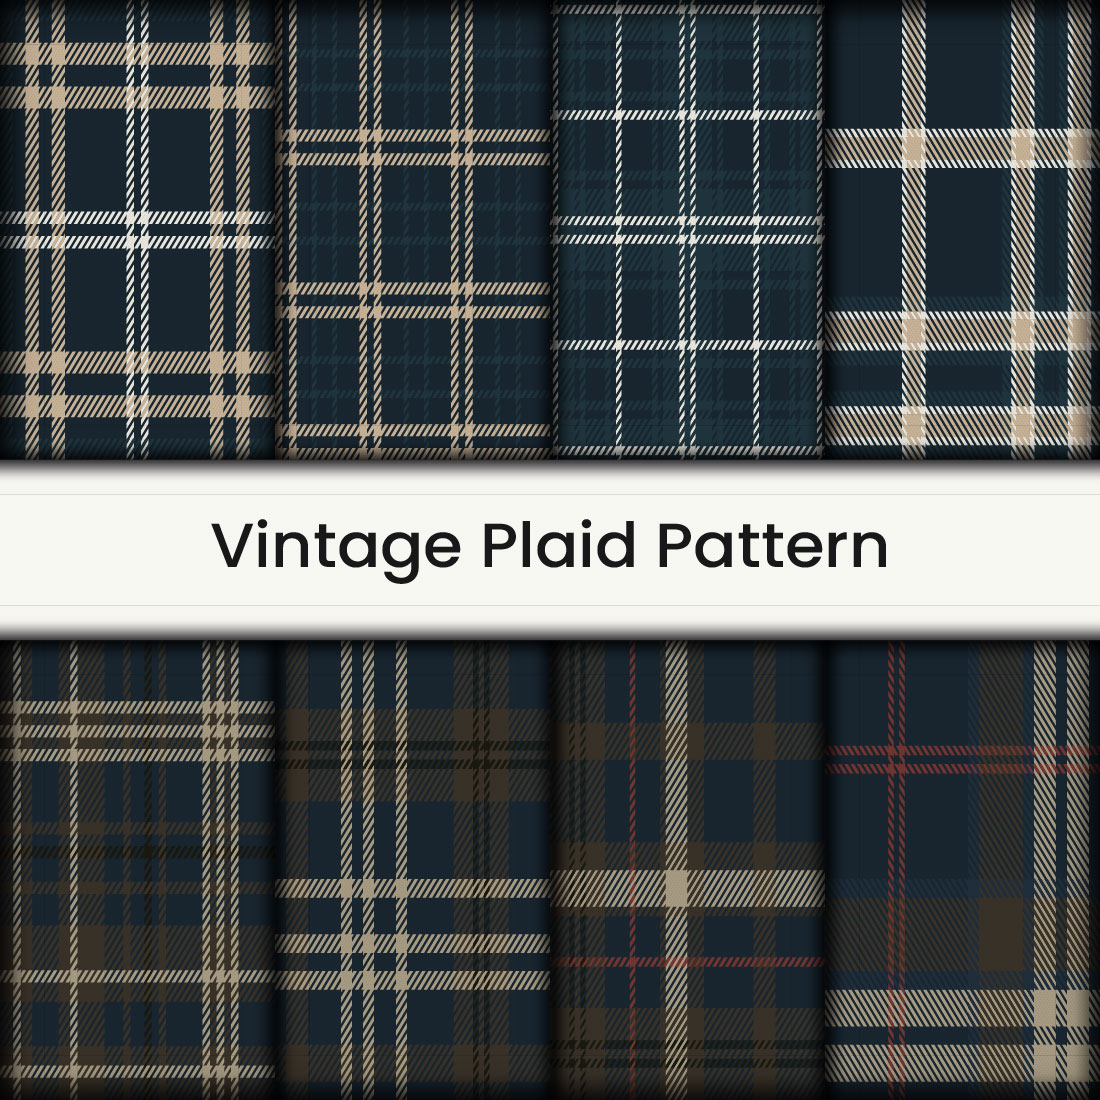 Bundle of check plaid pattern or scarf, blanket, throw, shirt other fashion textile design only $10 cover image.